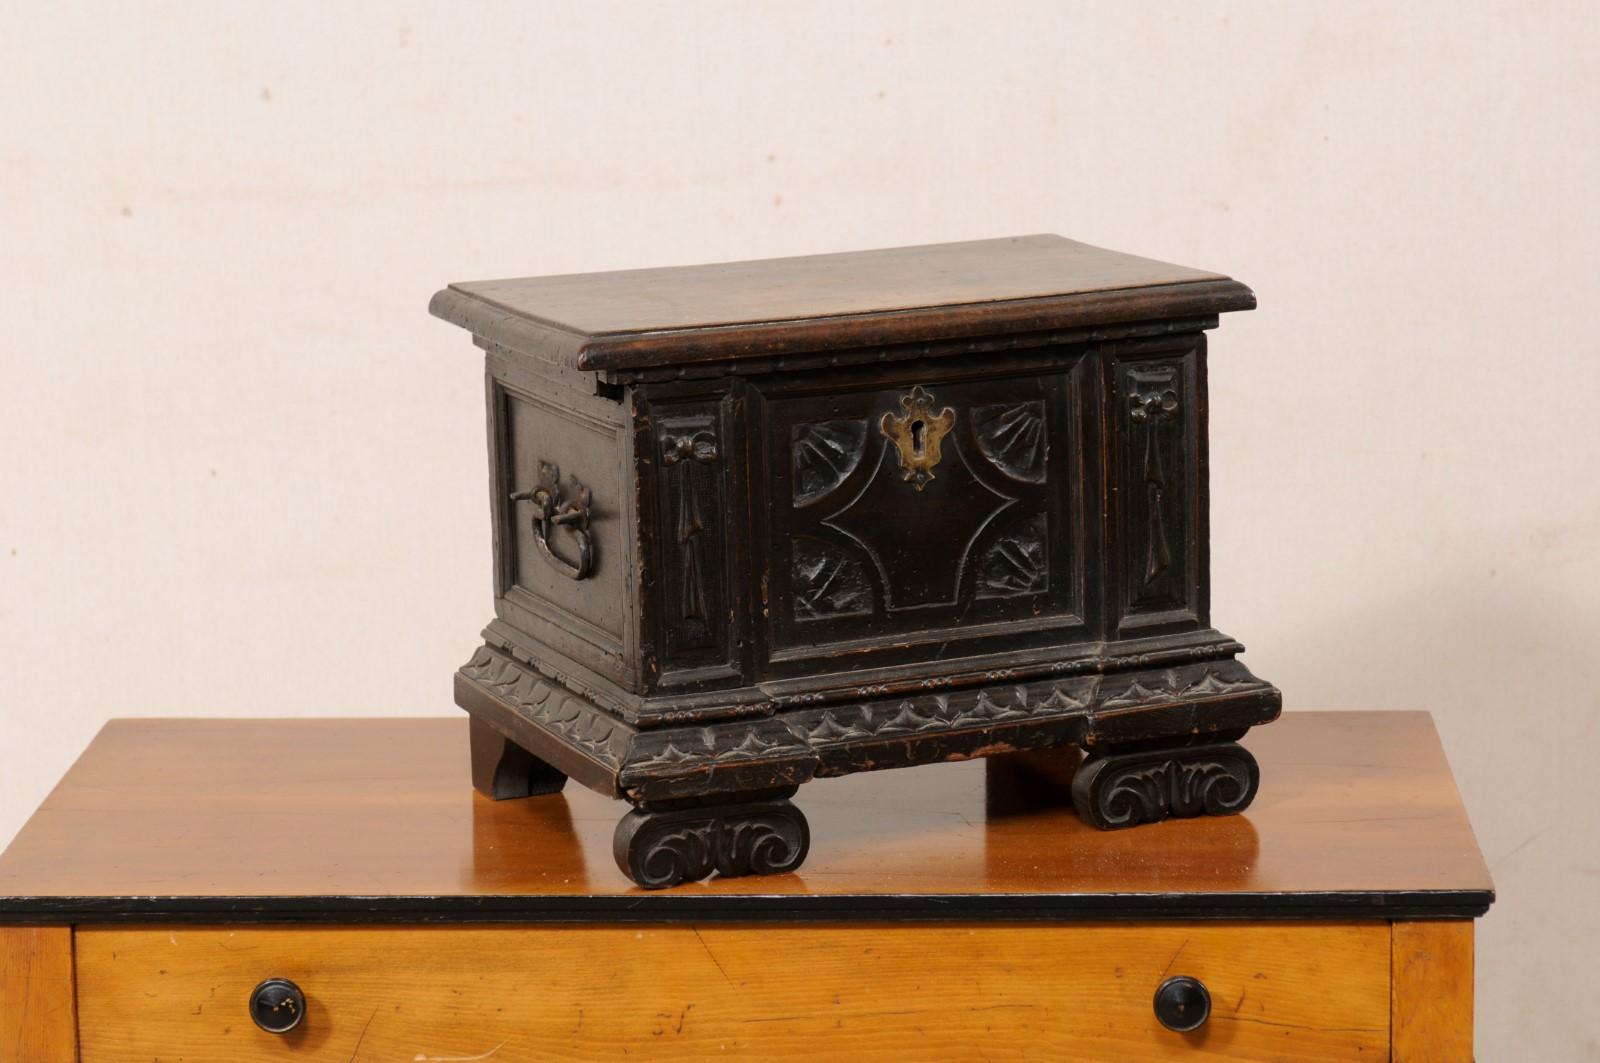 An English small-sized wooden box, circa 1770-1800. This antique box from England has been lovingly hand-carved with four quartered-wheels at each inner corner of the central panel, flanked within rectangular panels with hanging bows carved at their